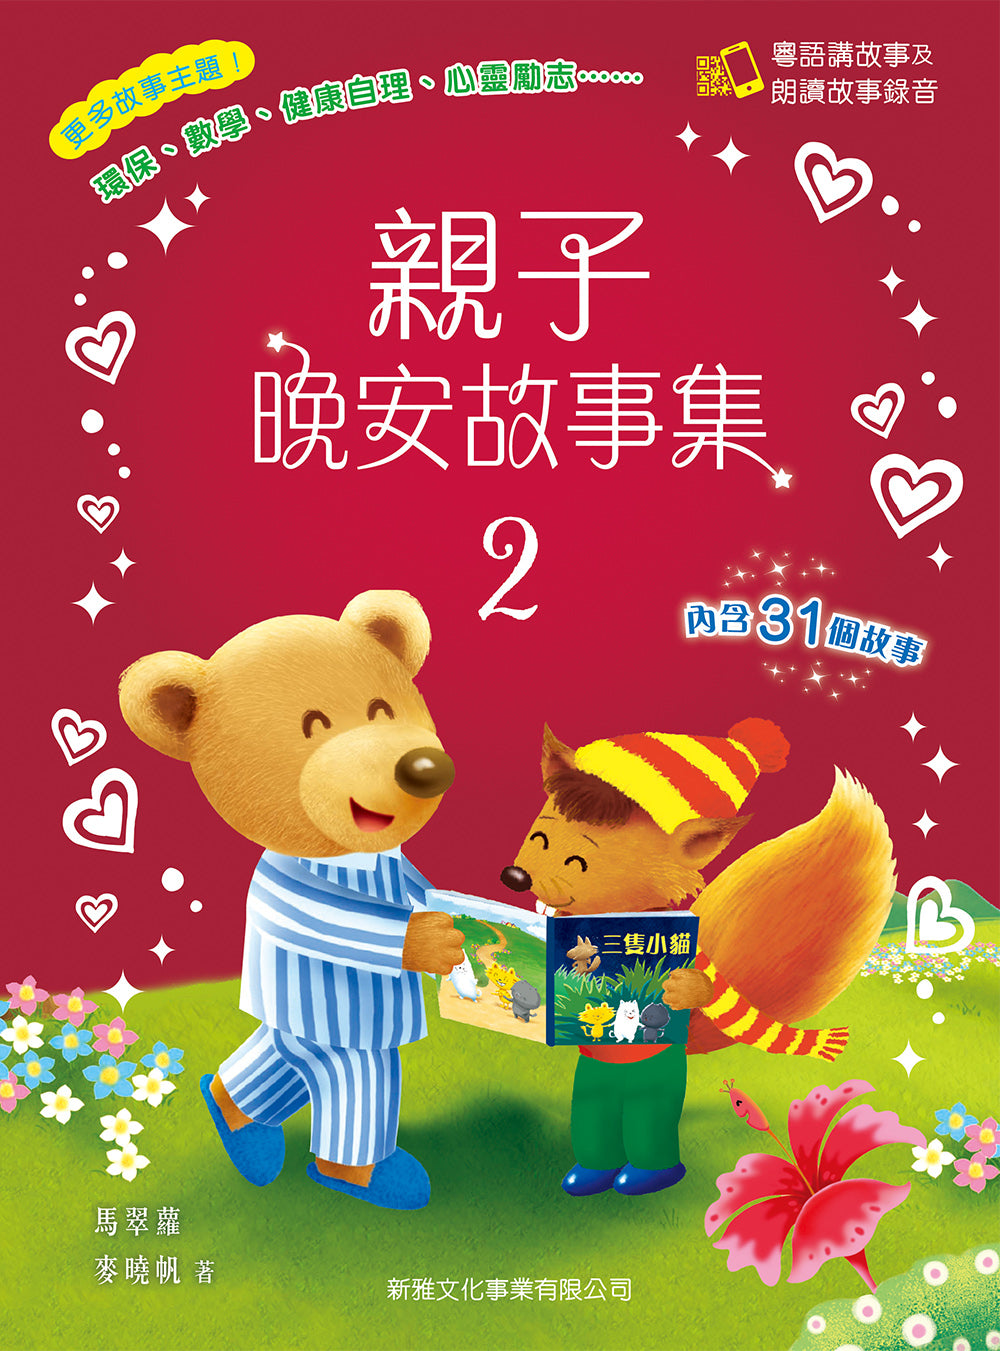 Bedtime Stories with Cantonese Audio #2 • 親子晚安故事集 2